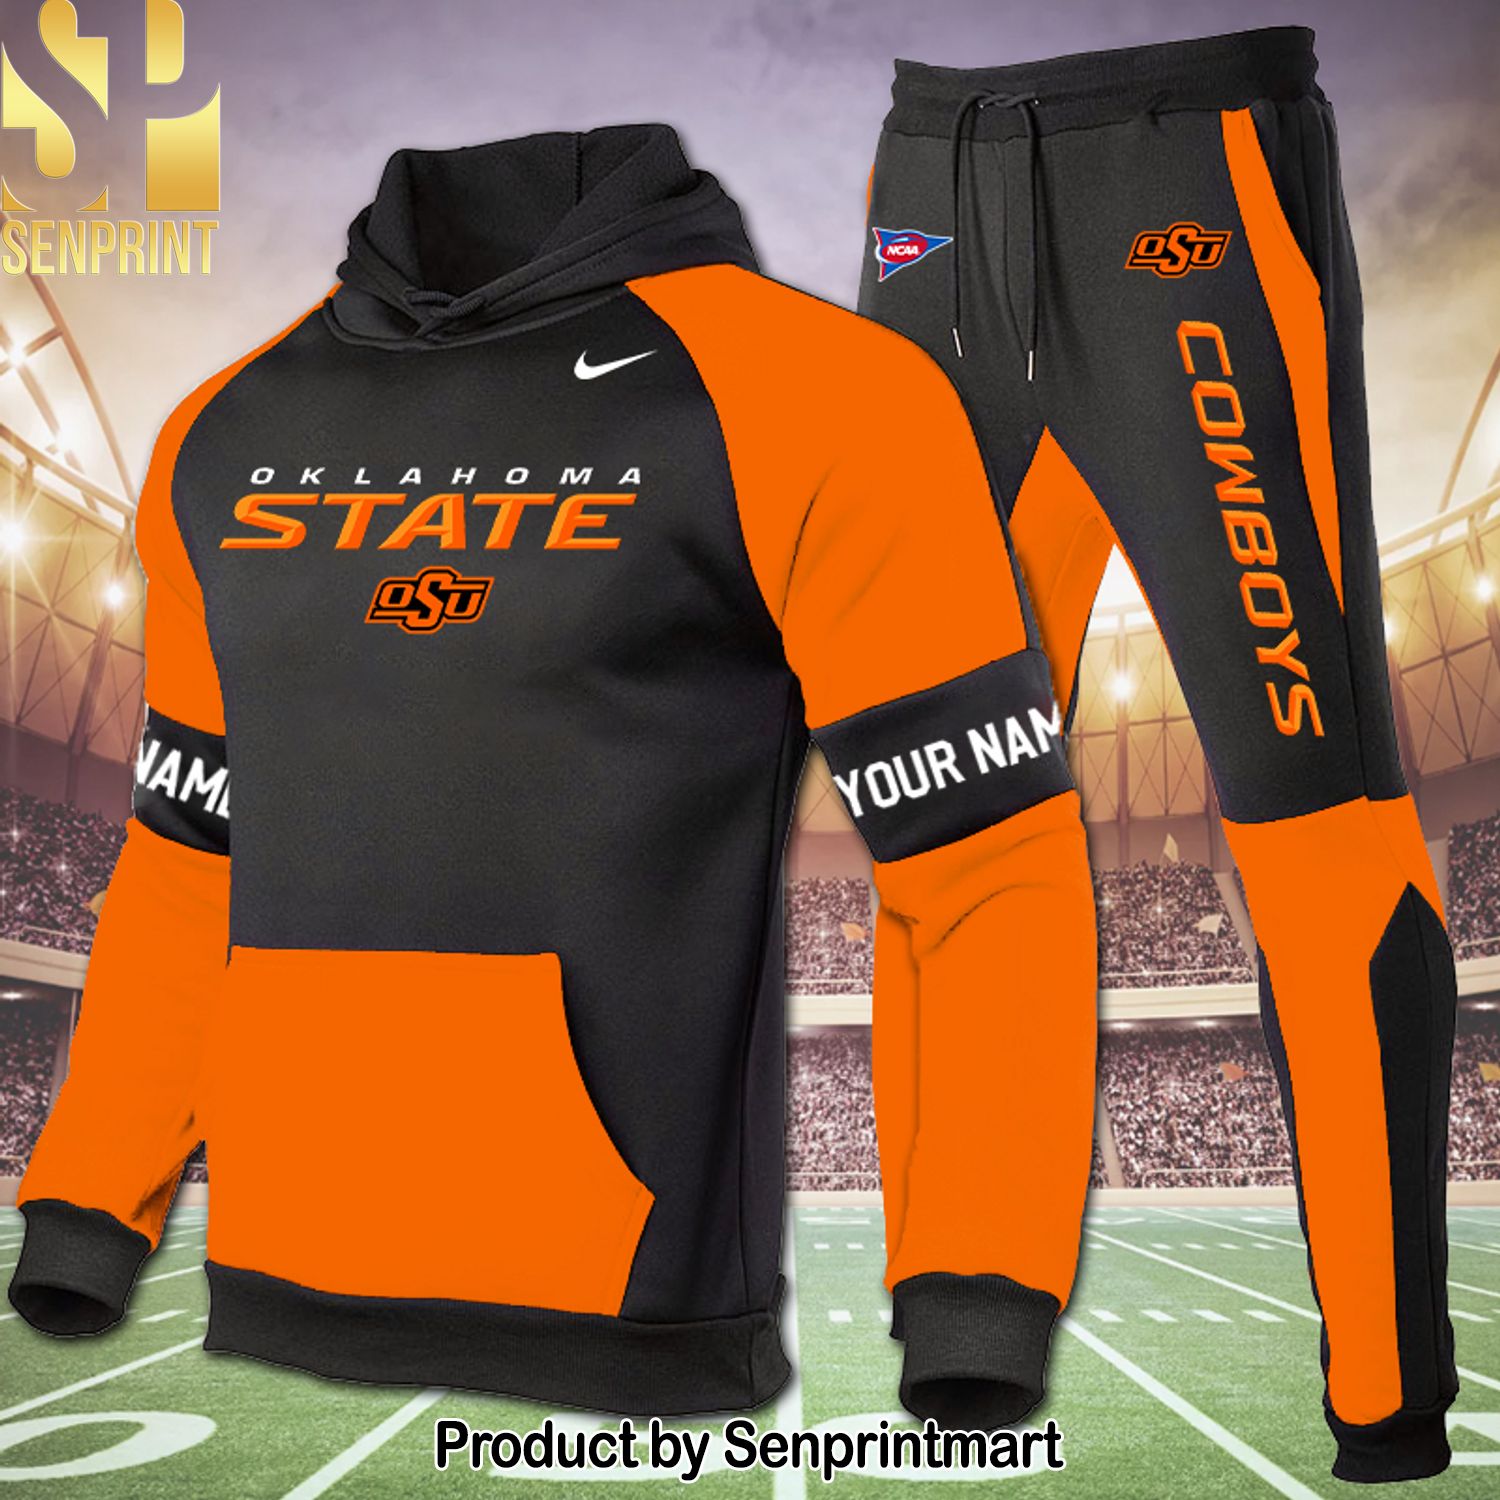 Oklahoma State All Over Printed Classic Shirt and Pants